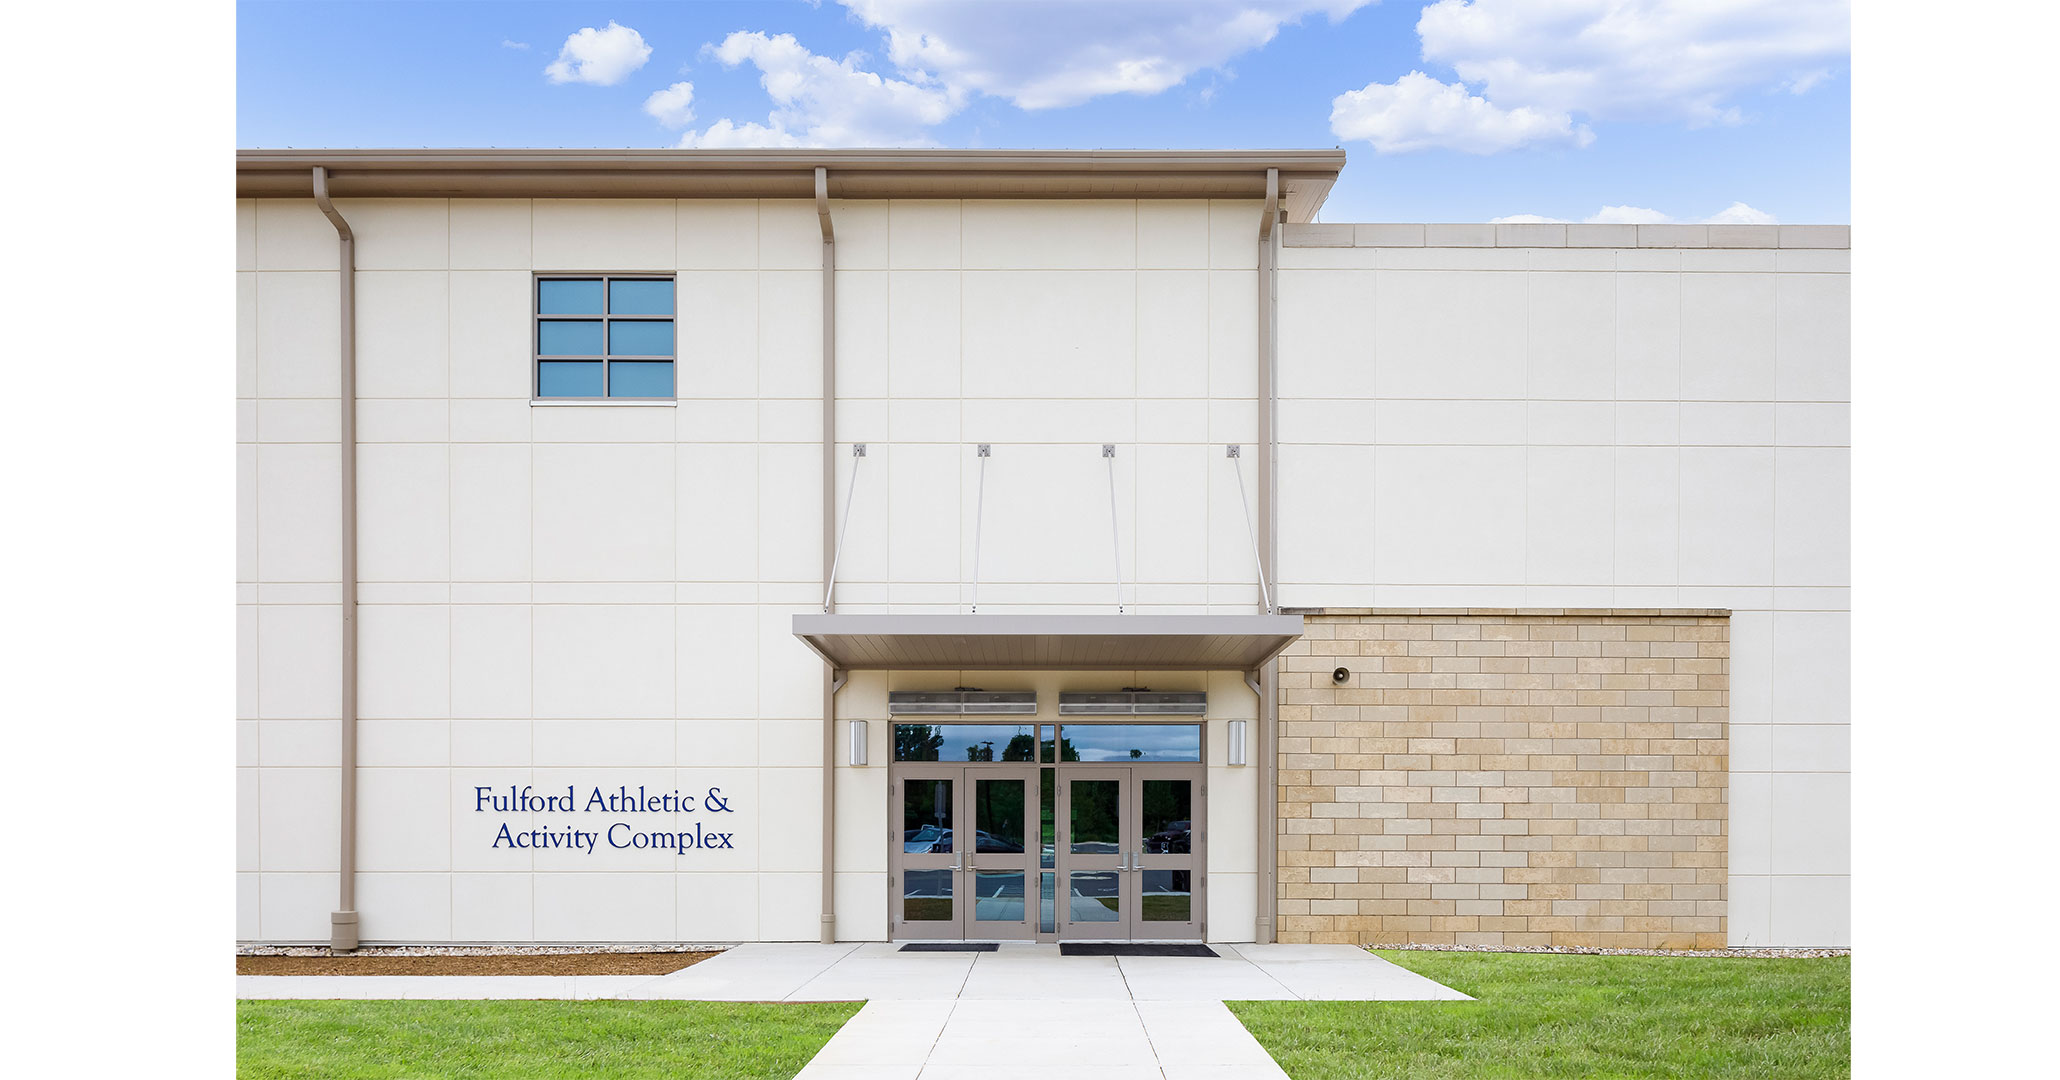 The Charlotte Diocese and Christ the King Catholic High School worked with Boudreaux master planners and architects to design the school’s cafeteria.